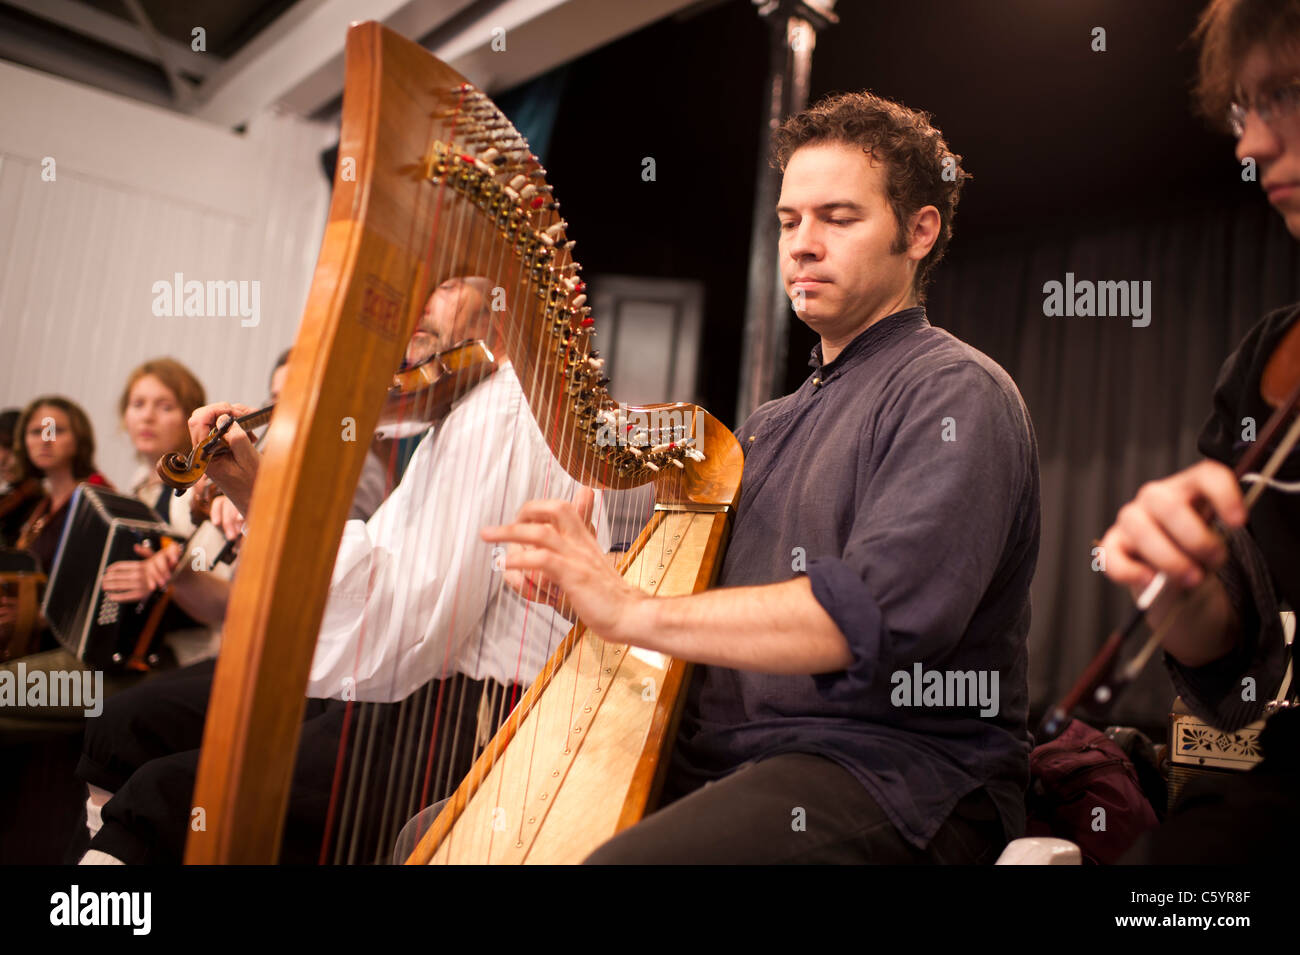 welsh folk musicians playing fiddle and harp, wales uk Stock Photo